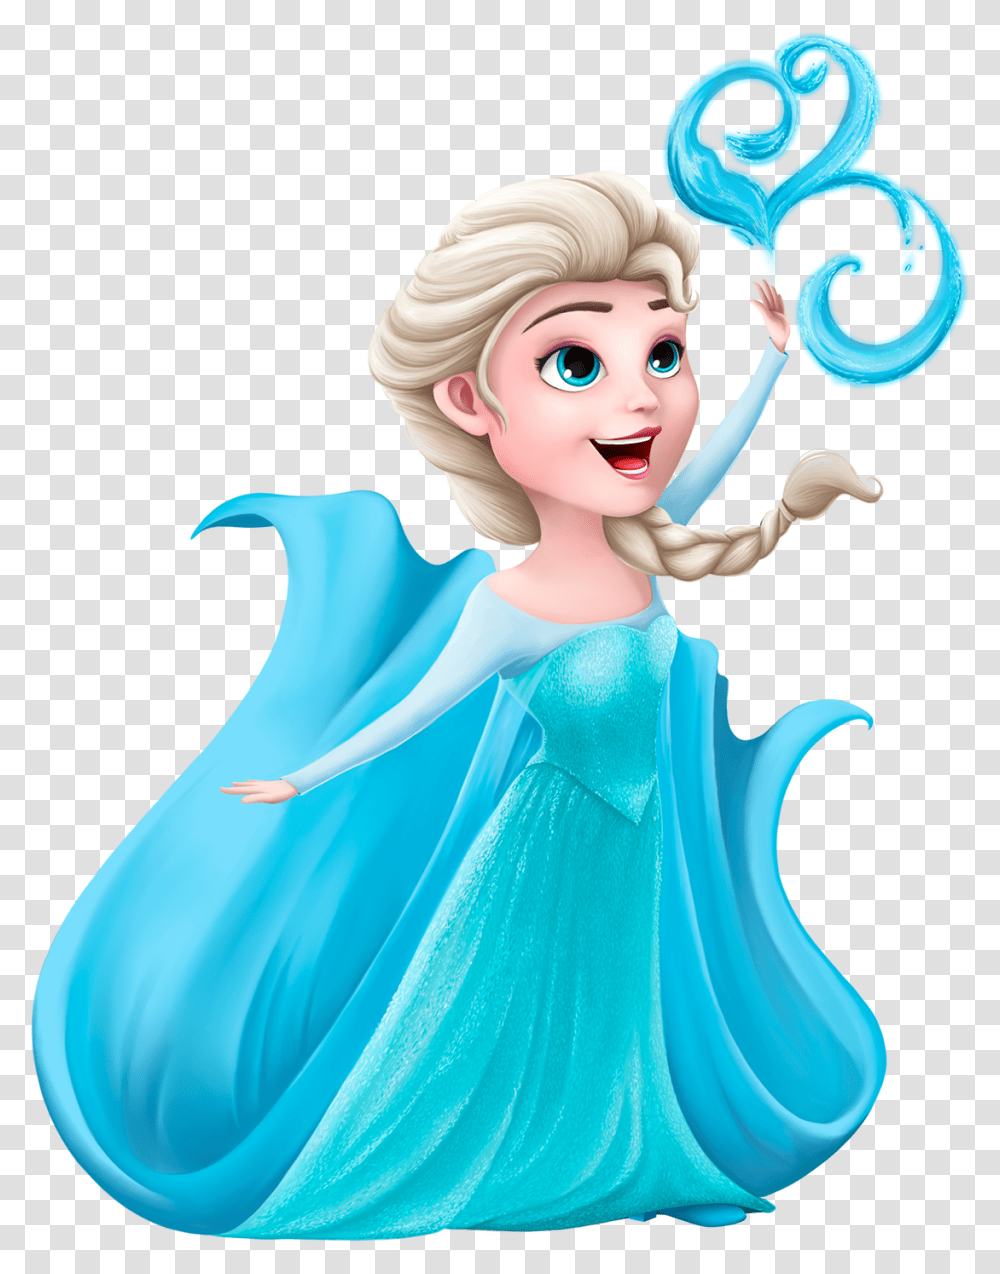 Clip Art Characters On Behance Illustrated Free Pictures Of Frozen Characters, Figurine, Doll, Toy, Barbie Transparent Png